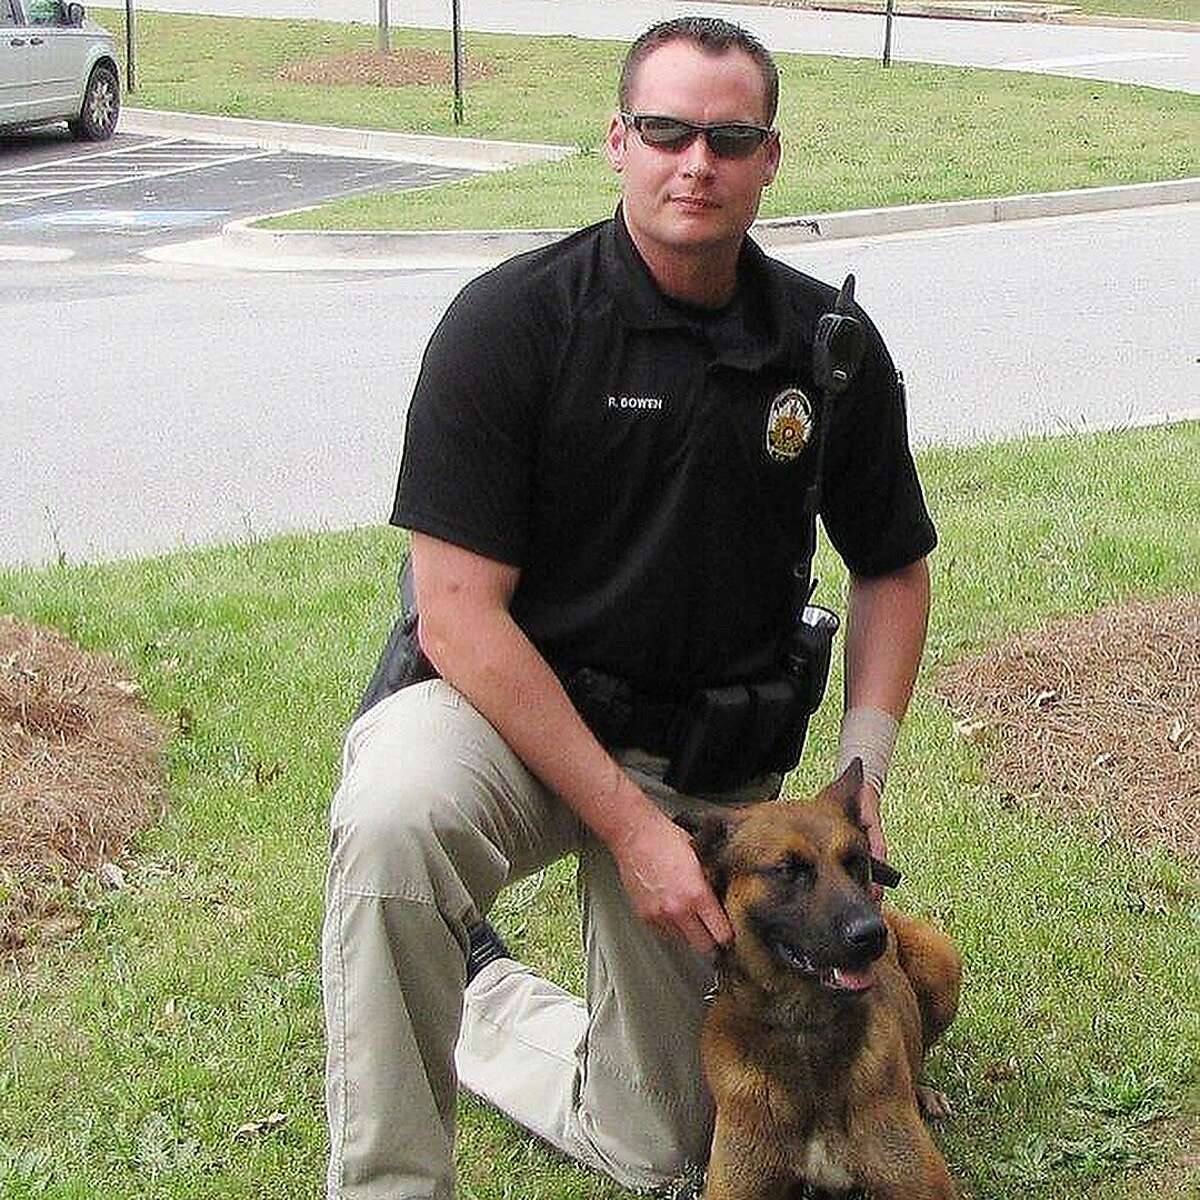 Former A's catcher Rob Bowen works with his first K9 partner, Jester, in Henry County, Ga.